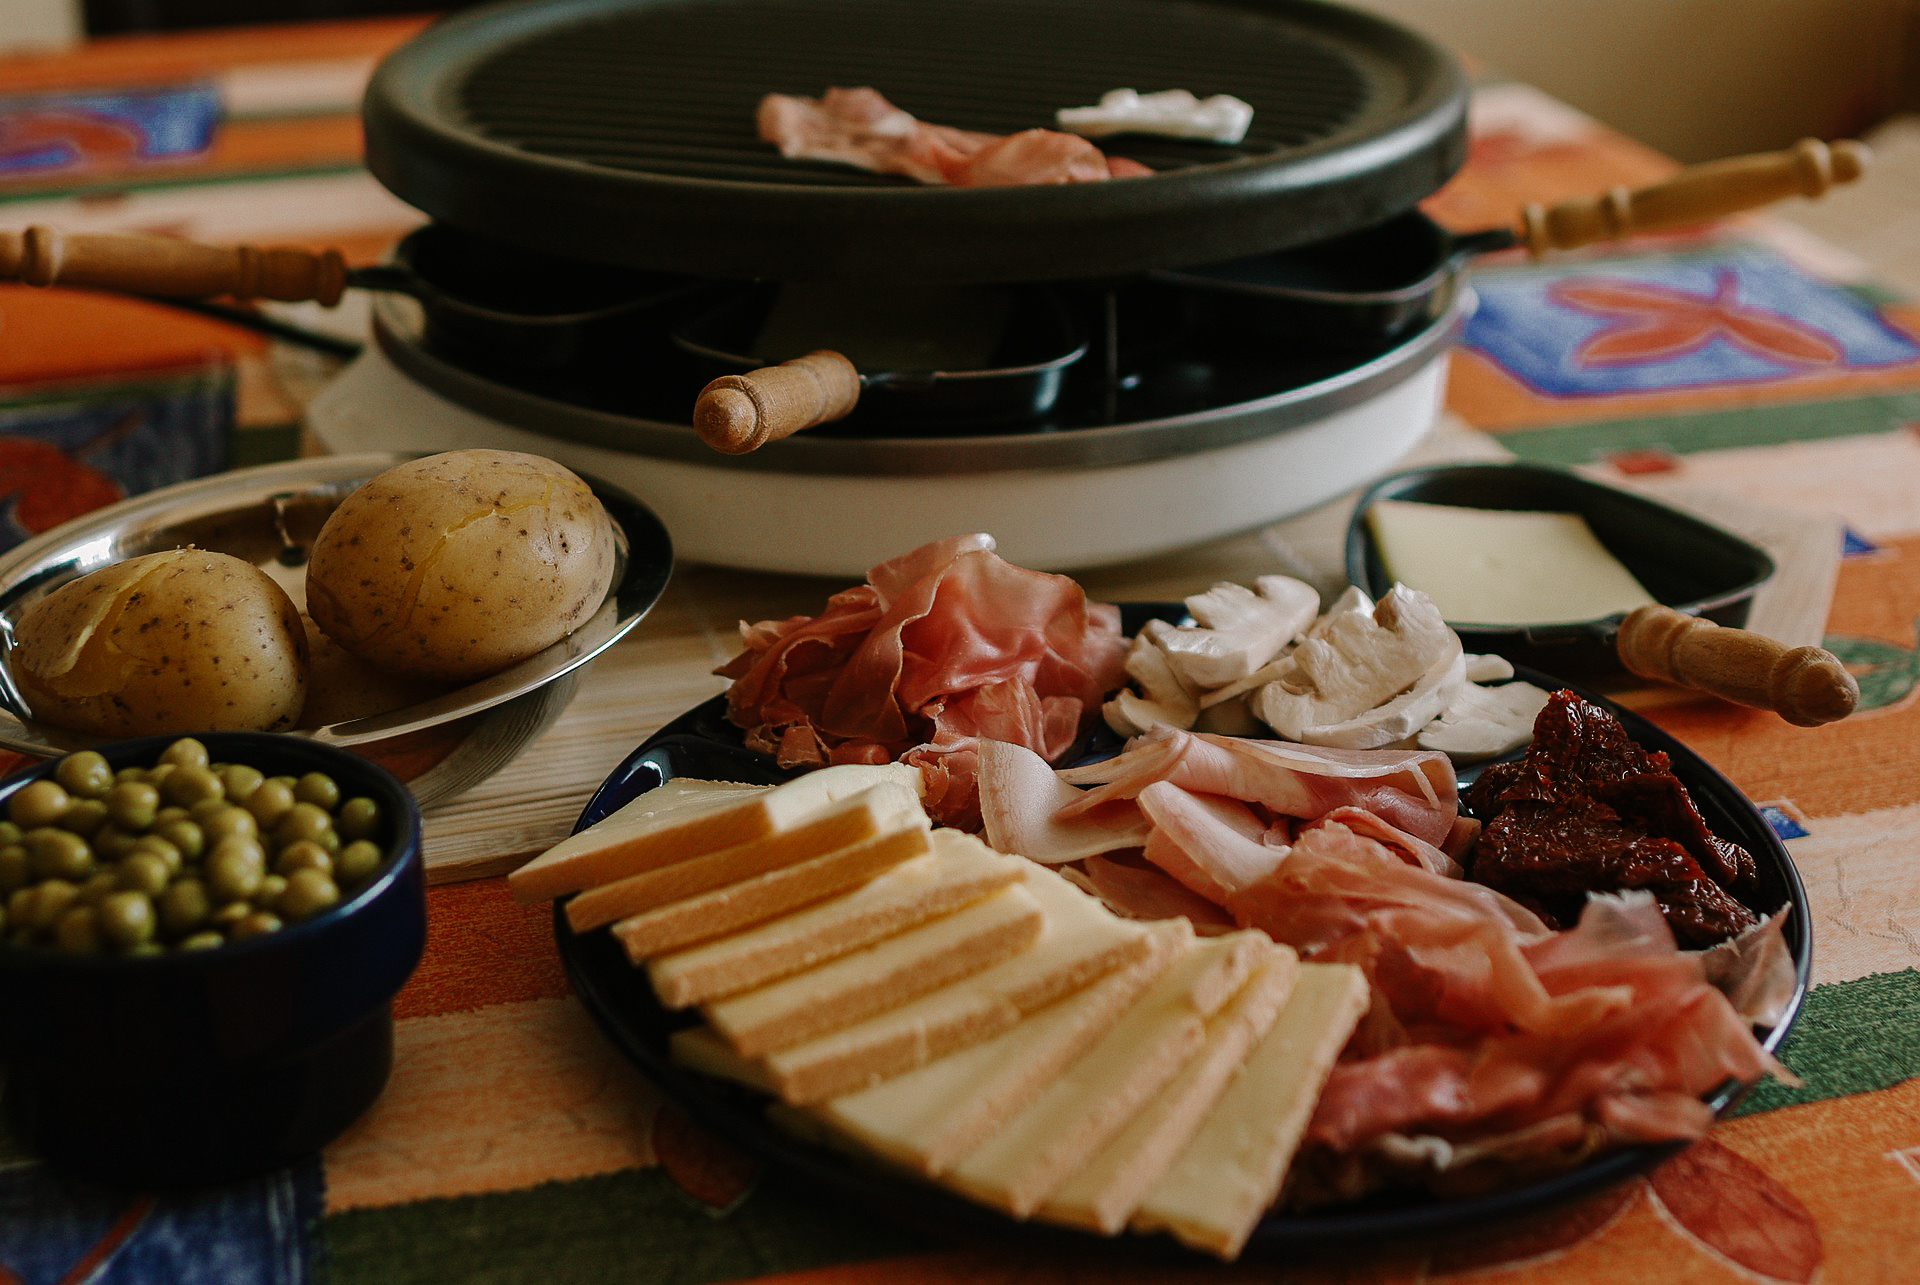 A meal in Zermatt for Christmas made up of a plate of charcuterie meat, raclette cheese, mushrooms, peas, and potatoes in front of a raclette grill